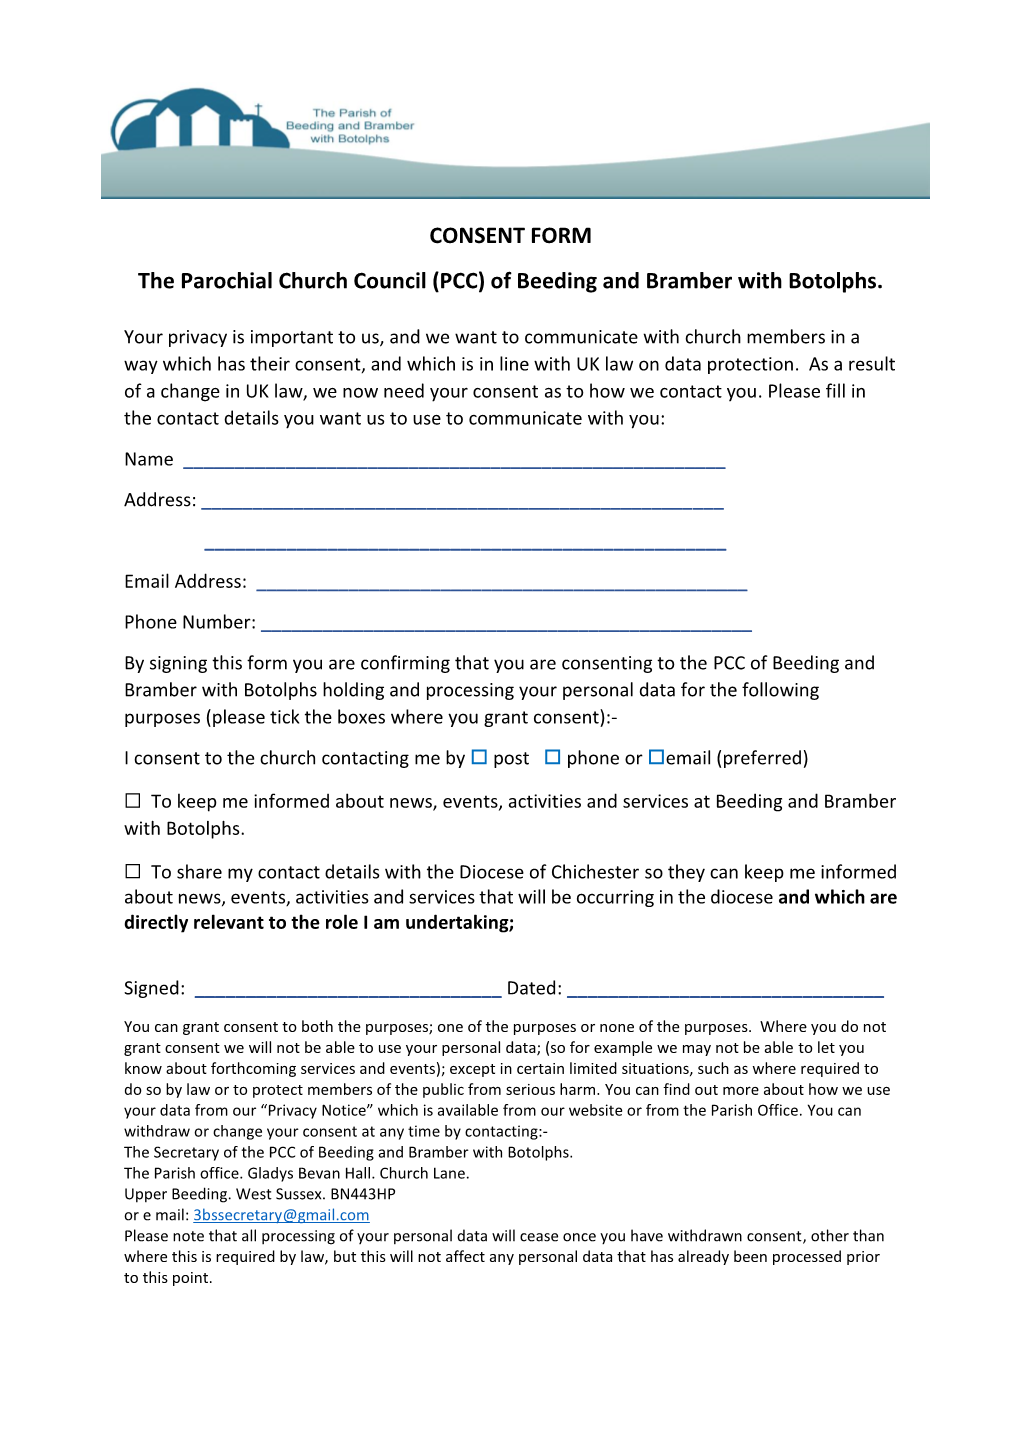 CONSENT FORM the Parochial Church Council (PCC) of Beeding and Bramber with Botolphs